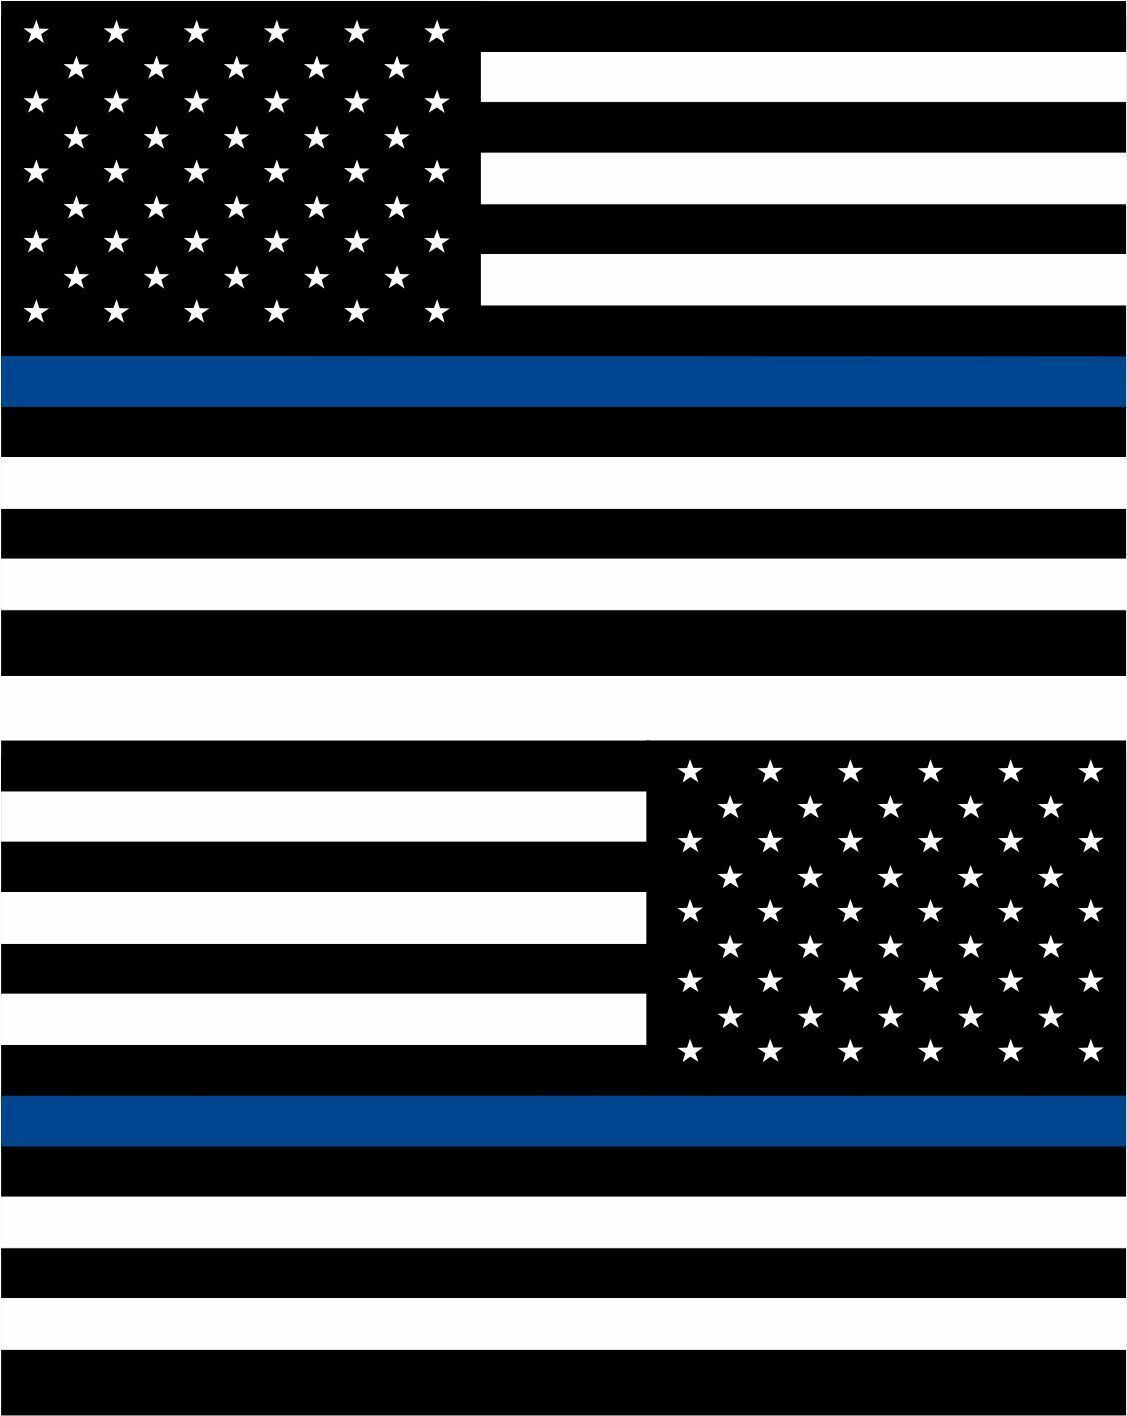 Police Officer Thin Blue Line Reverse reflective American Flag Decals 3.75x 2.25 - Powercall Sirens LLC